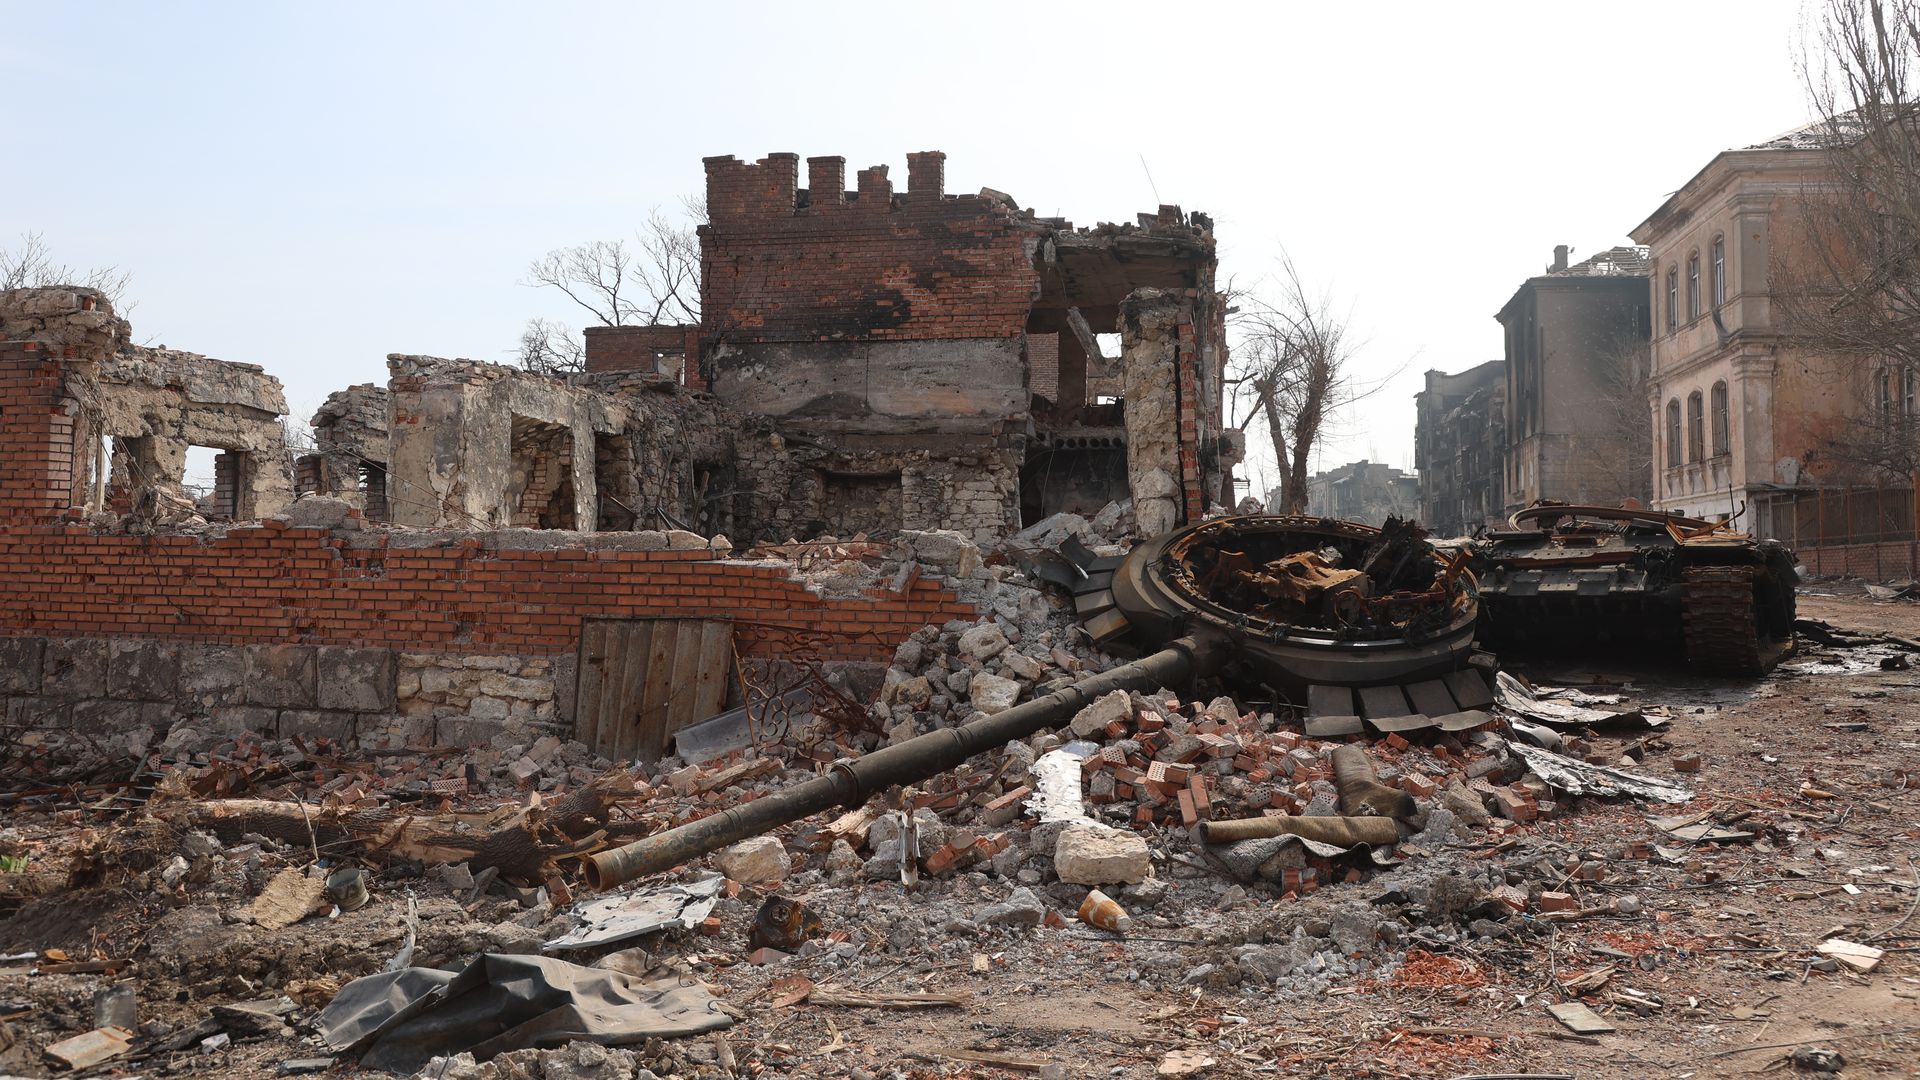 Photo of rubble, bricks and torn-down building in the aftermath of an explosion